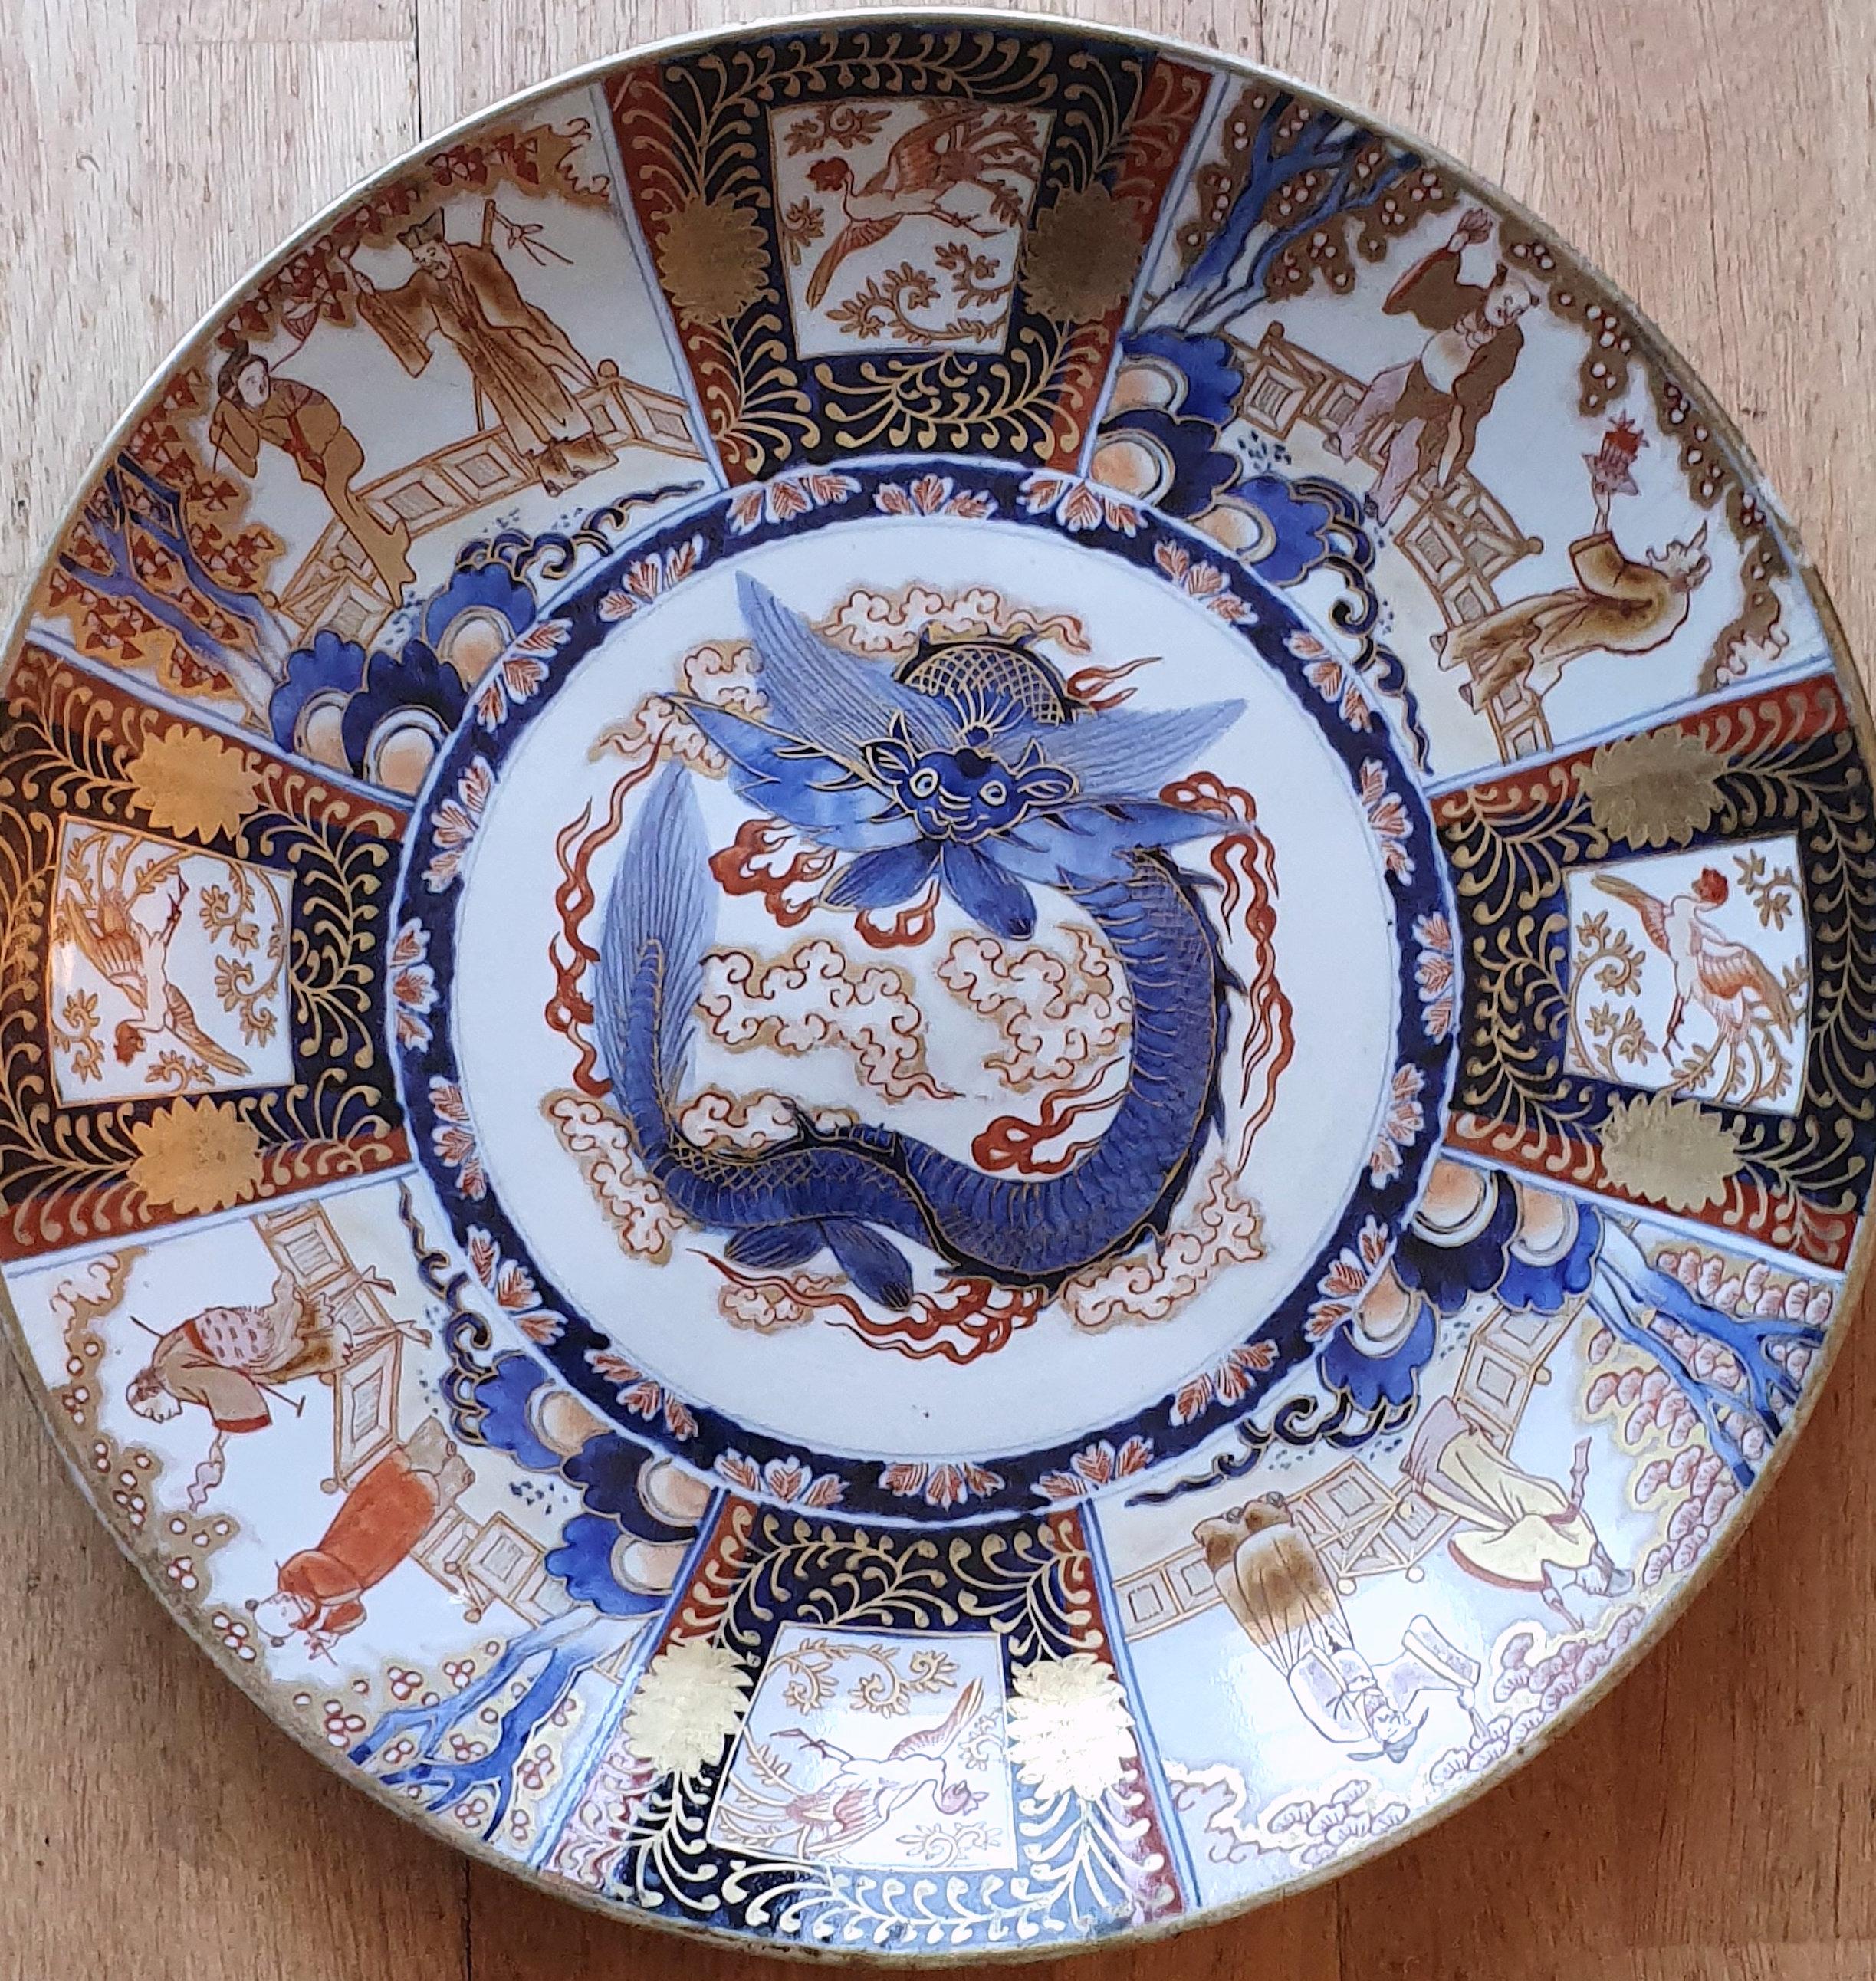 This 19th century Japanese Meiji period pottery Imari charger, painted with a central dragon flanked by panels depicting figures and exotic birds with gilded highlights. The plate measures 15 ¾ in - 40 cm in diameter and 2 in – 5 cm in height. This